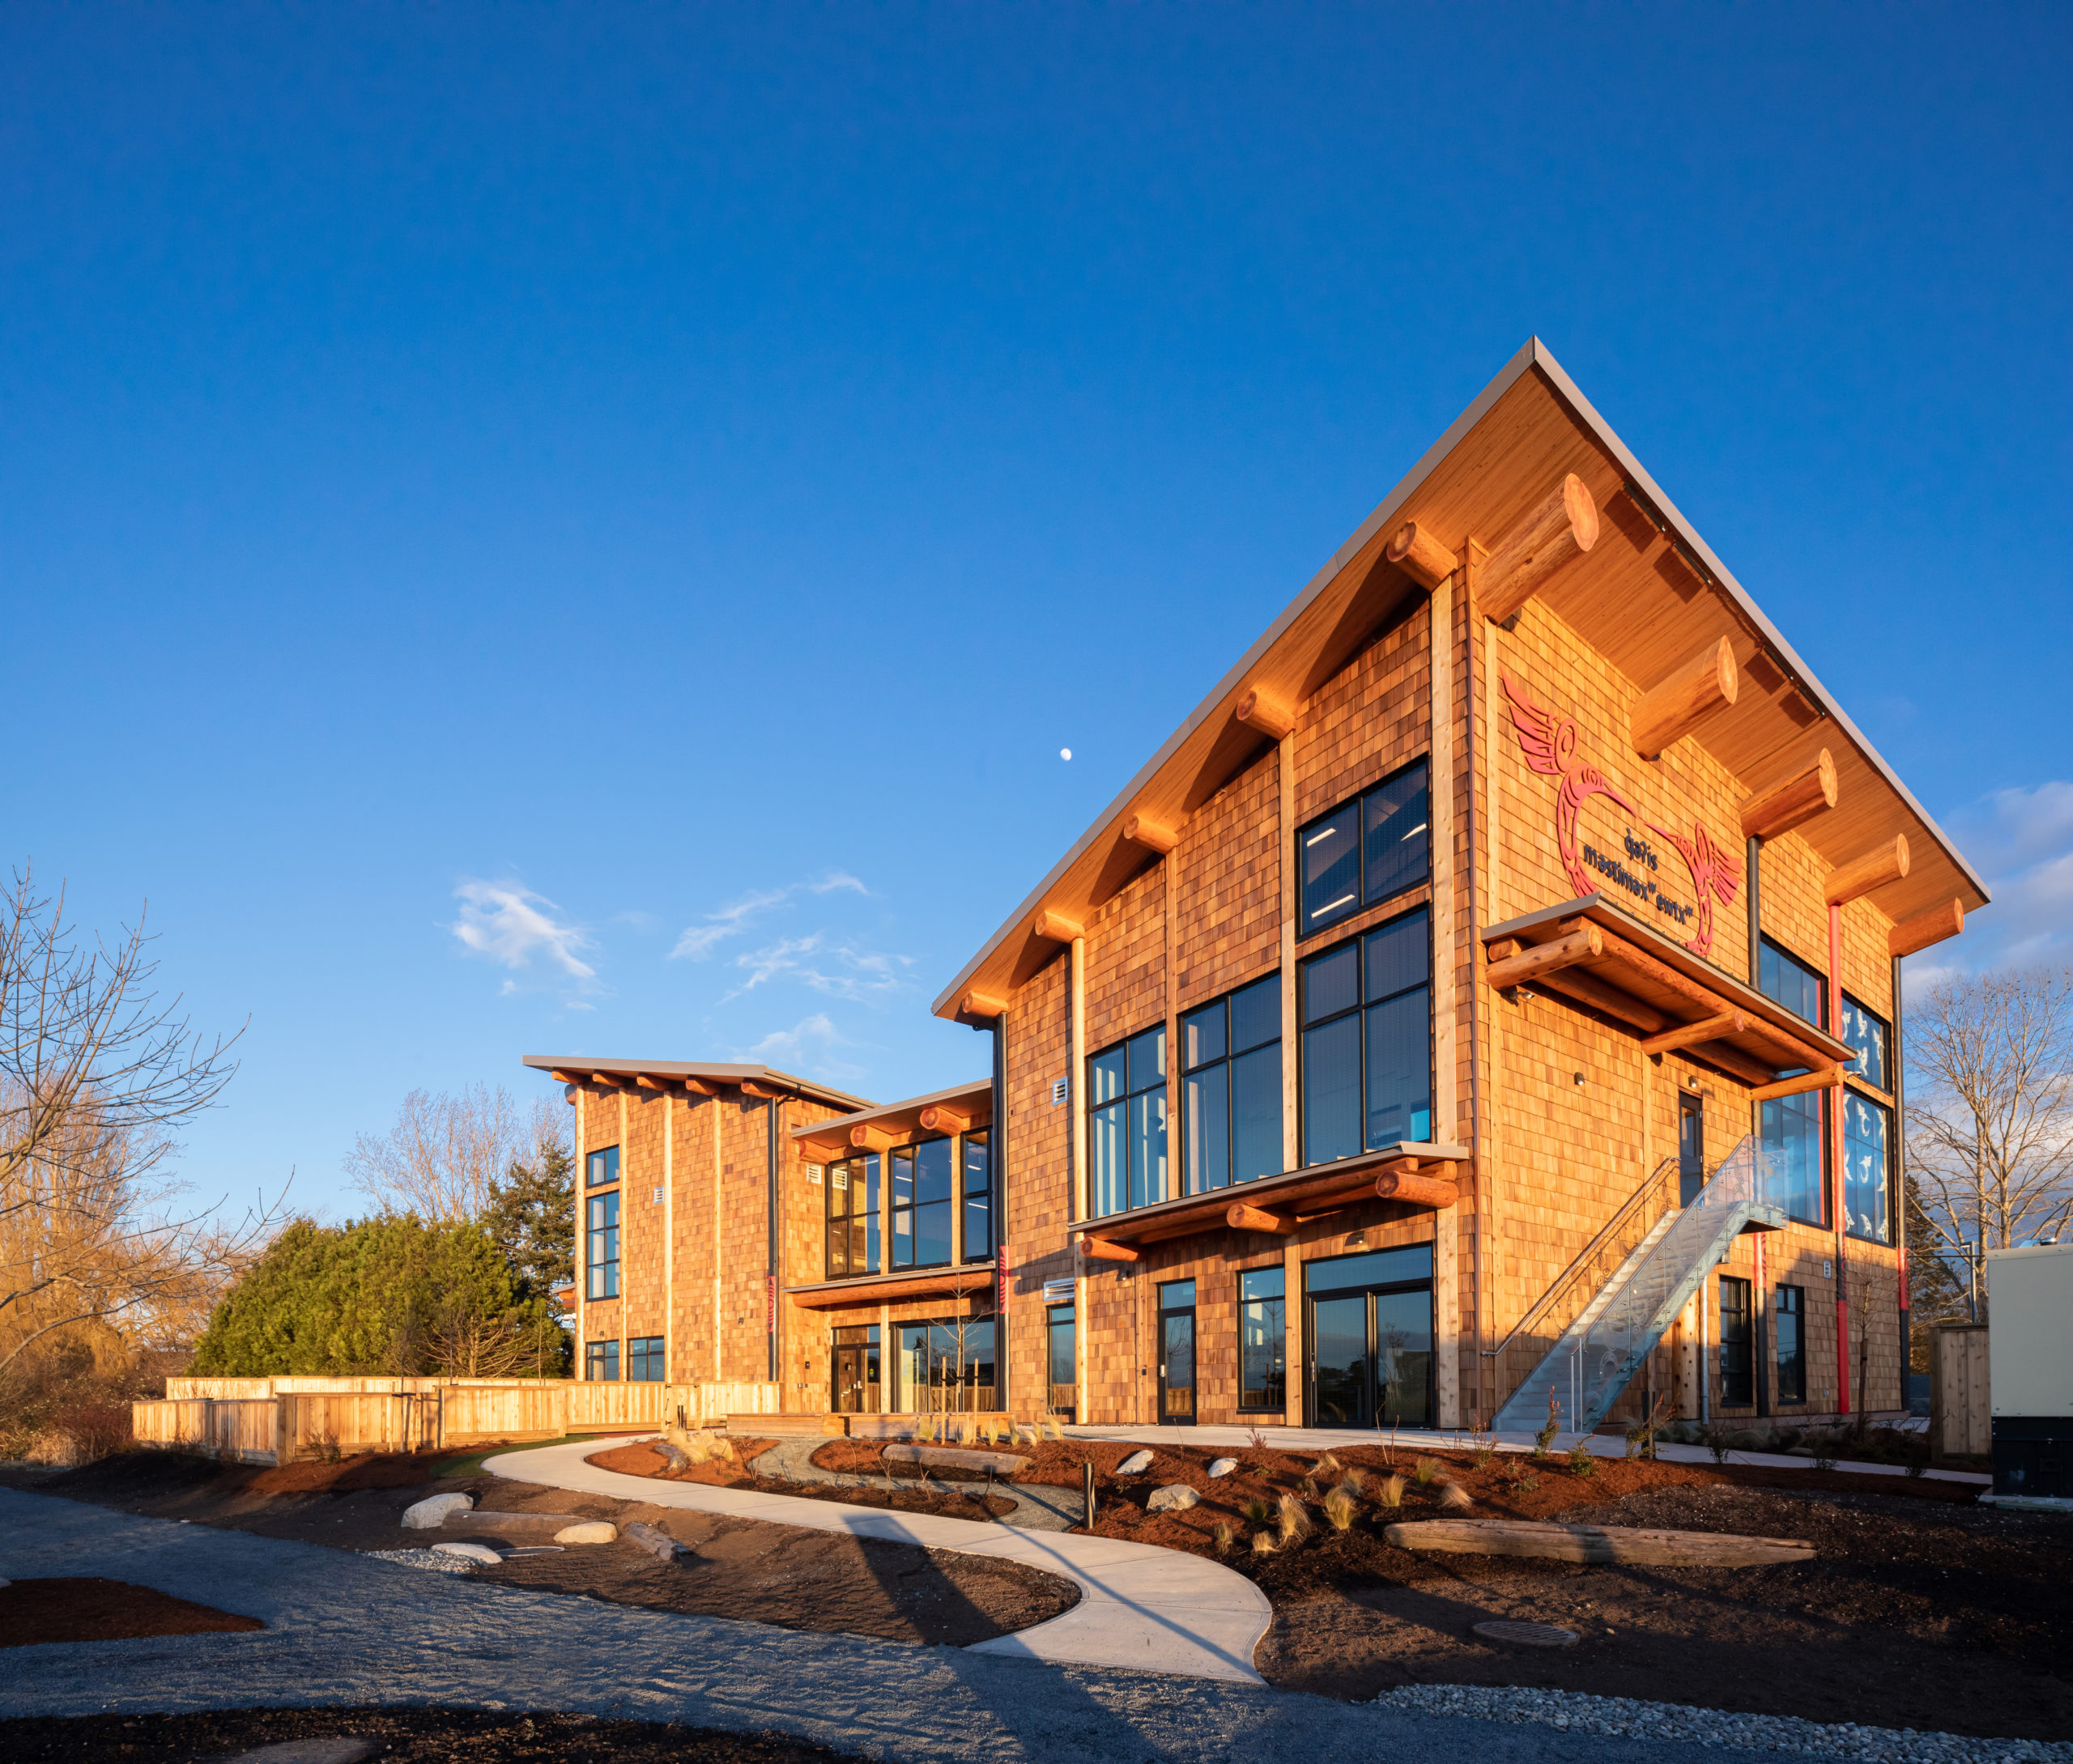 Exterior view of full mass timber building entrance side, with slanted roof and clear sunny sky.